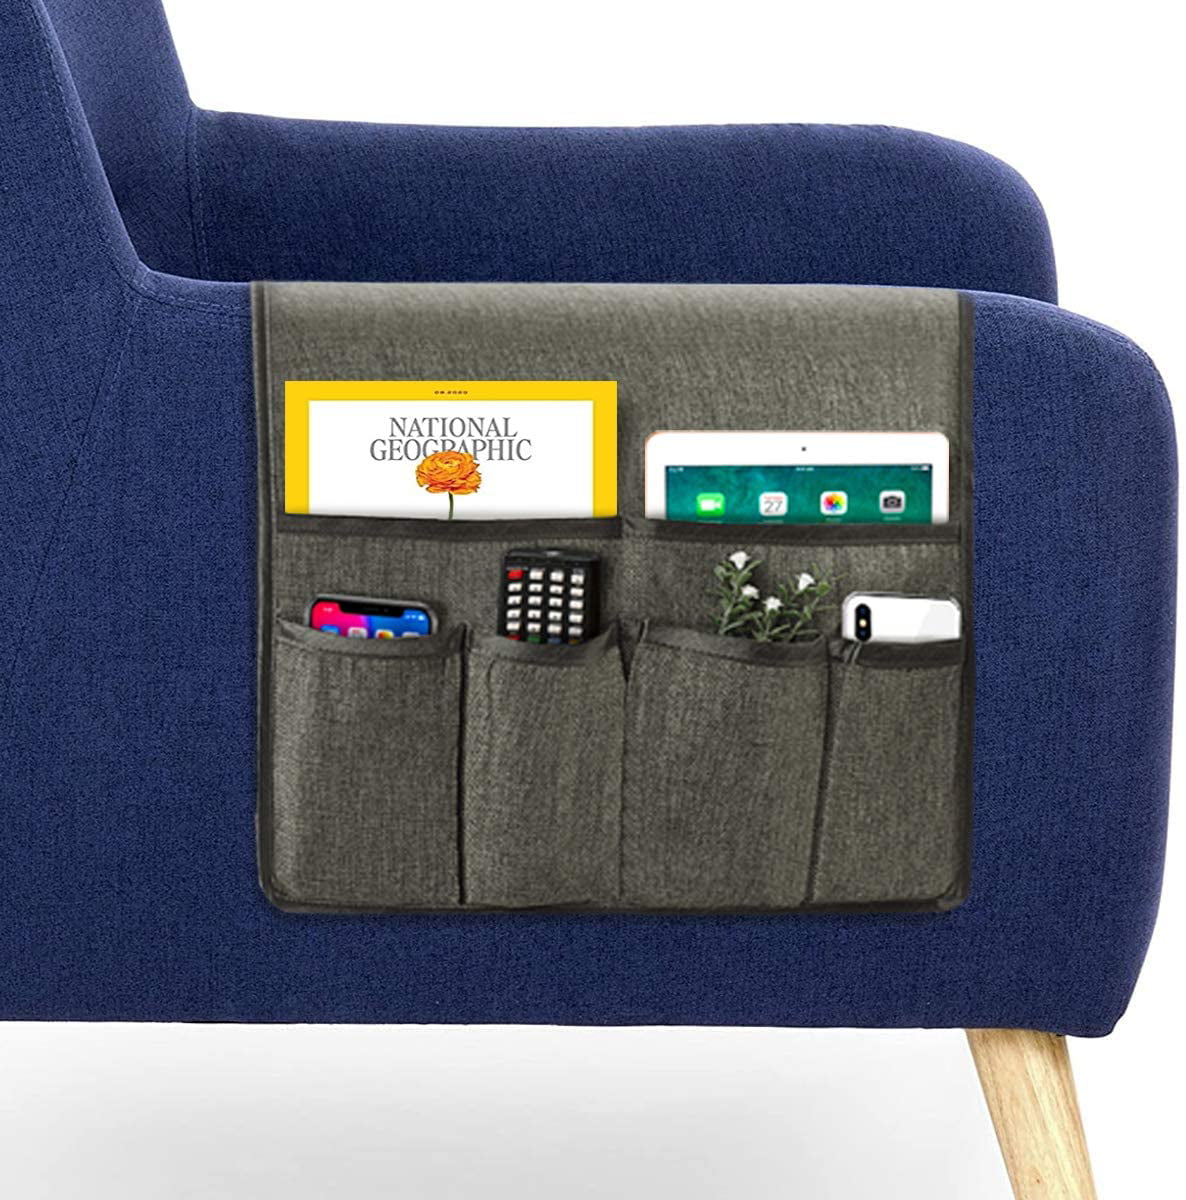 Clobeau Armrest Caddy,Couch Caddy Remote Organizer Magazine Holders Armchair Caddy Arm Chair Remote Control Sofa Caddy Arm Rest Holder Pocket Organizer Space Saver for Remote,Cell Phone,Books,Pencils